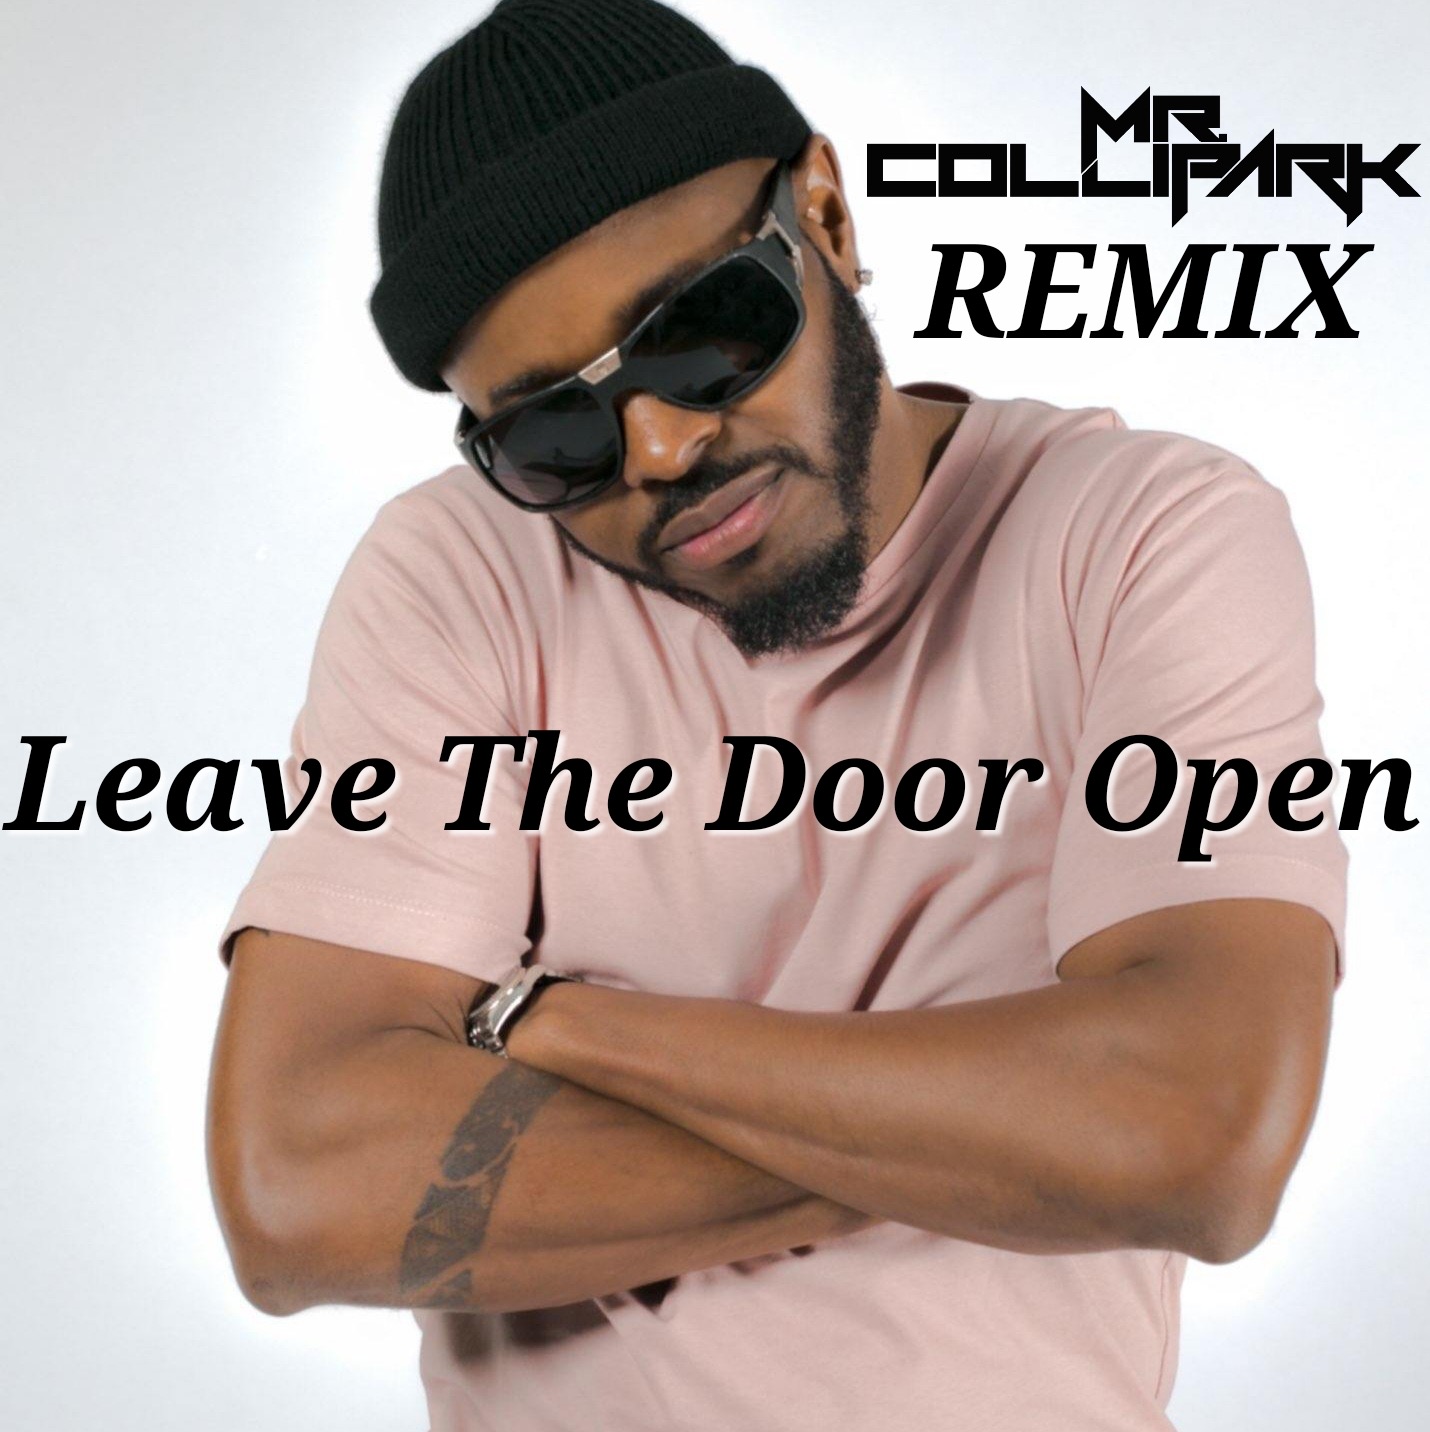 Art for Leave The Door Open (MR. COLLIPARK Remix) (Clean Extended) by Bruno Mars, Anderson .Paak & Silk Sonic